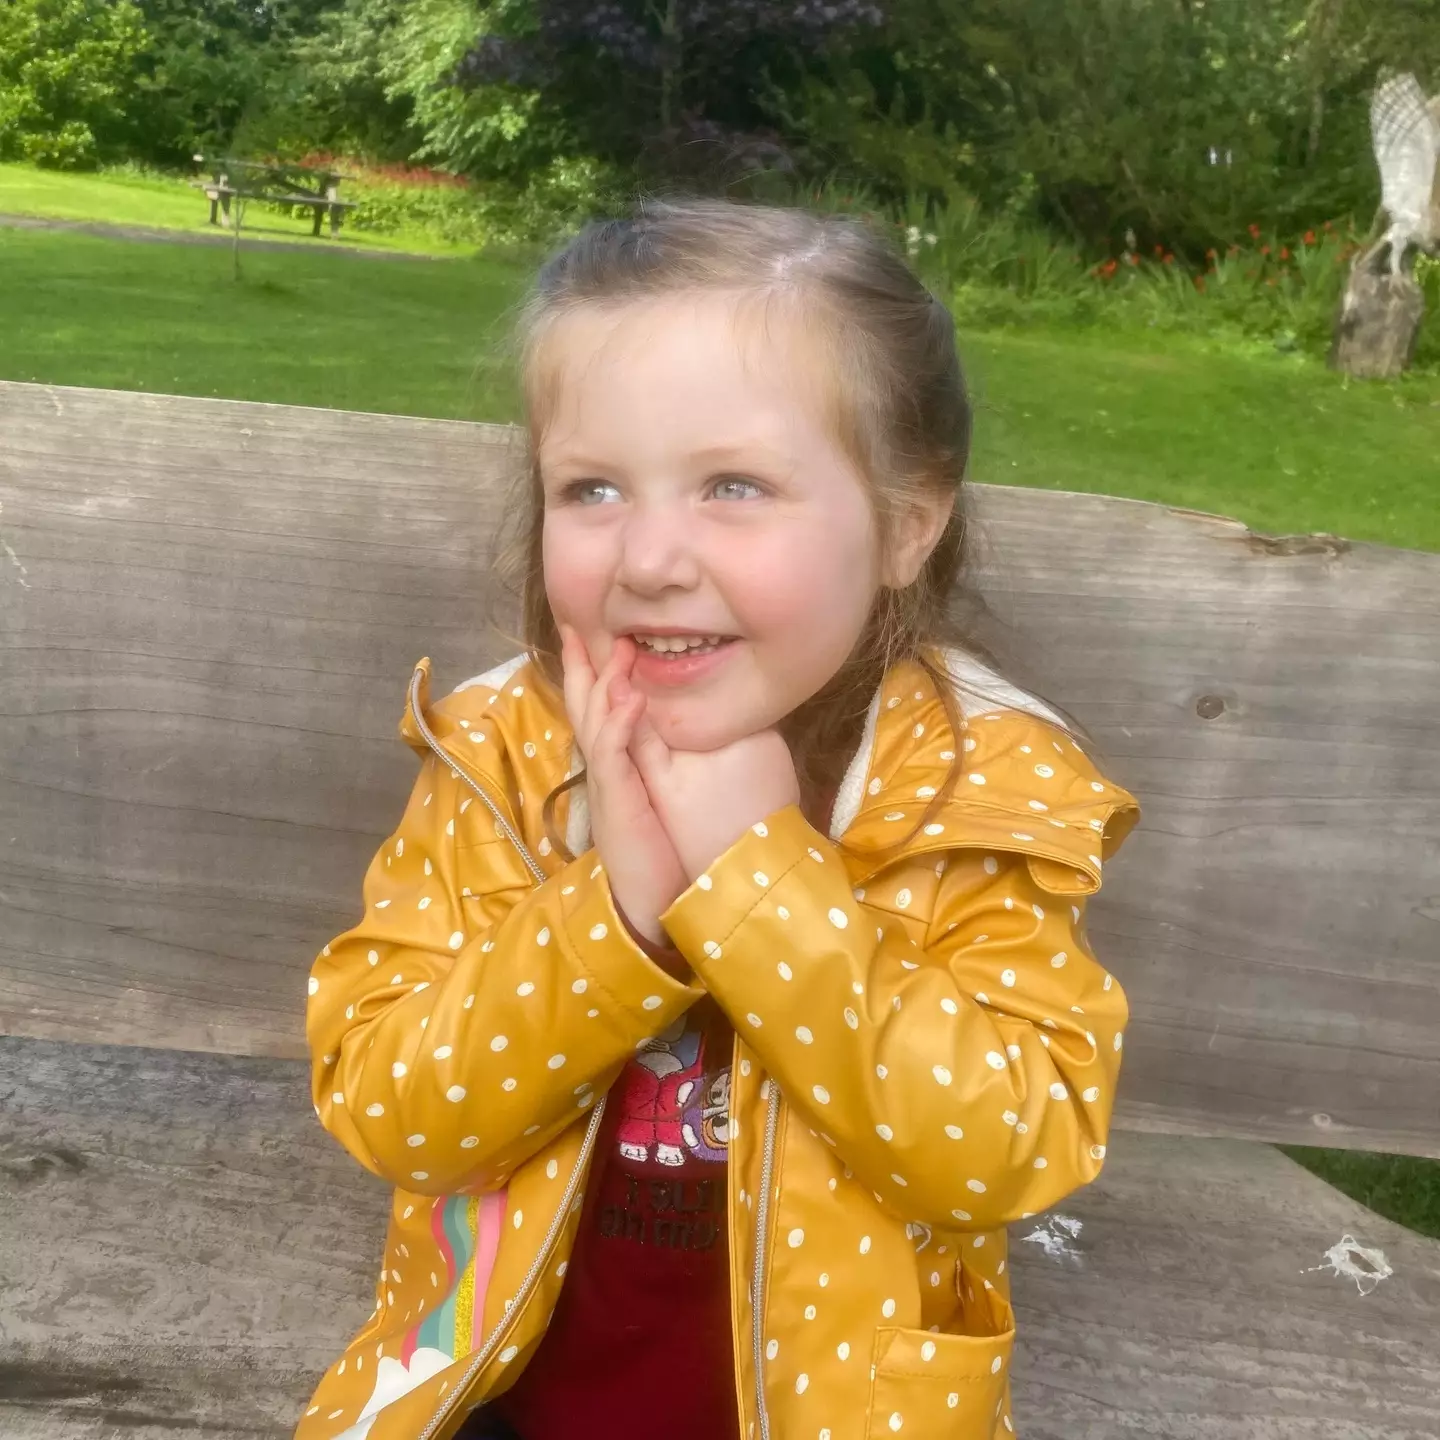 An inquest has heard that a toddler drowned in a partially-filled bath at her family home in Wales.